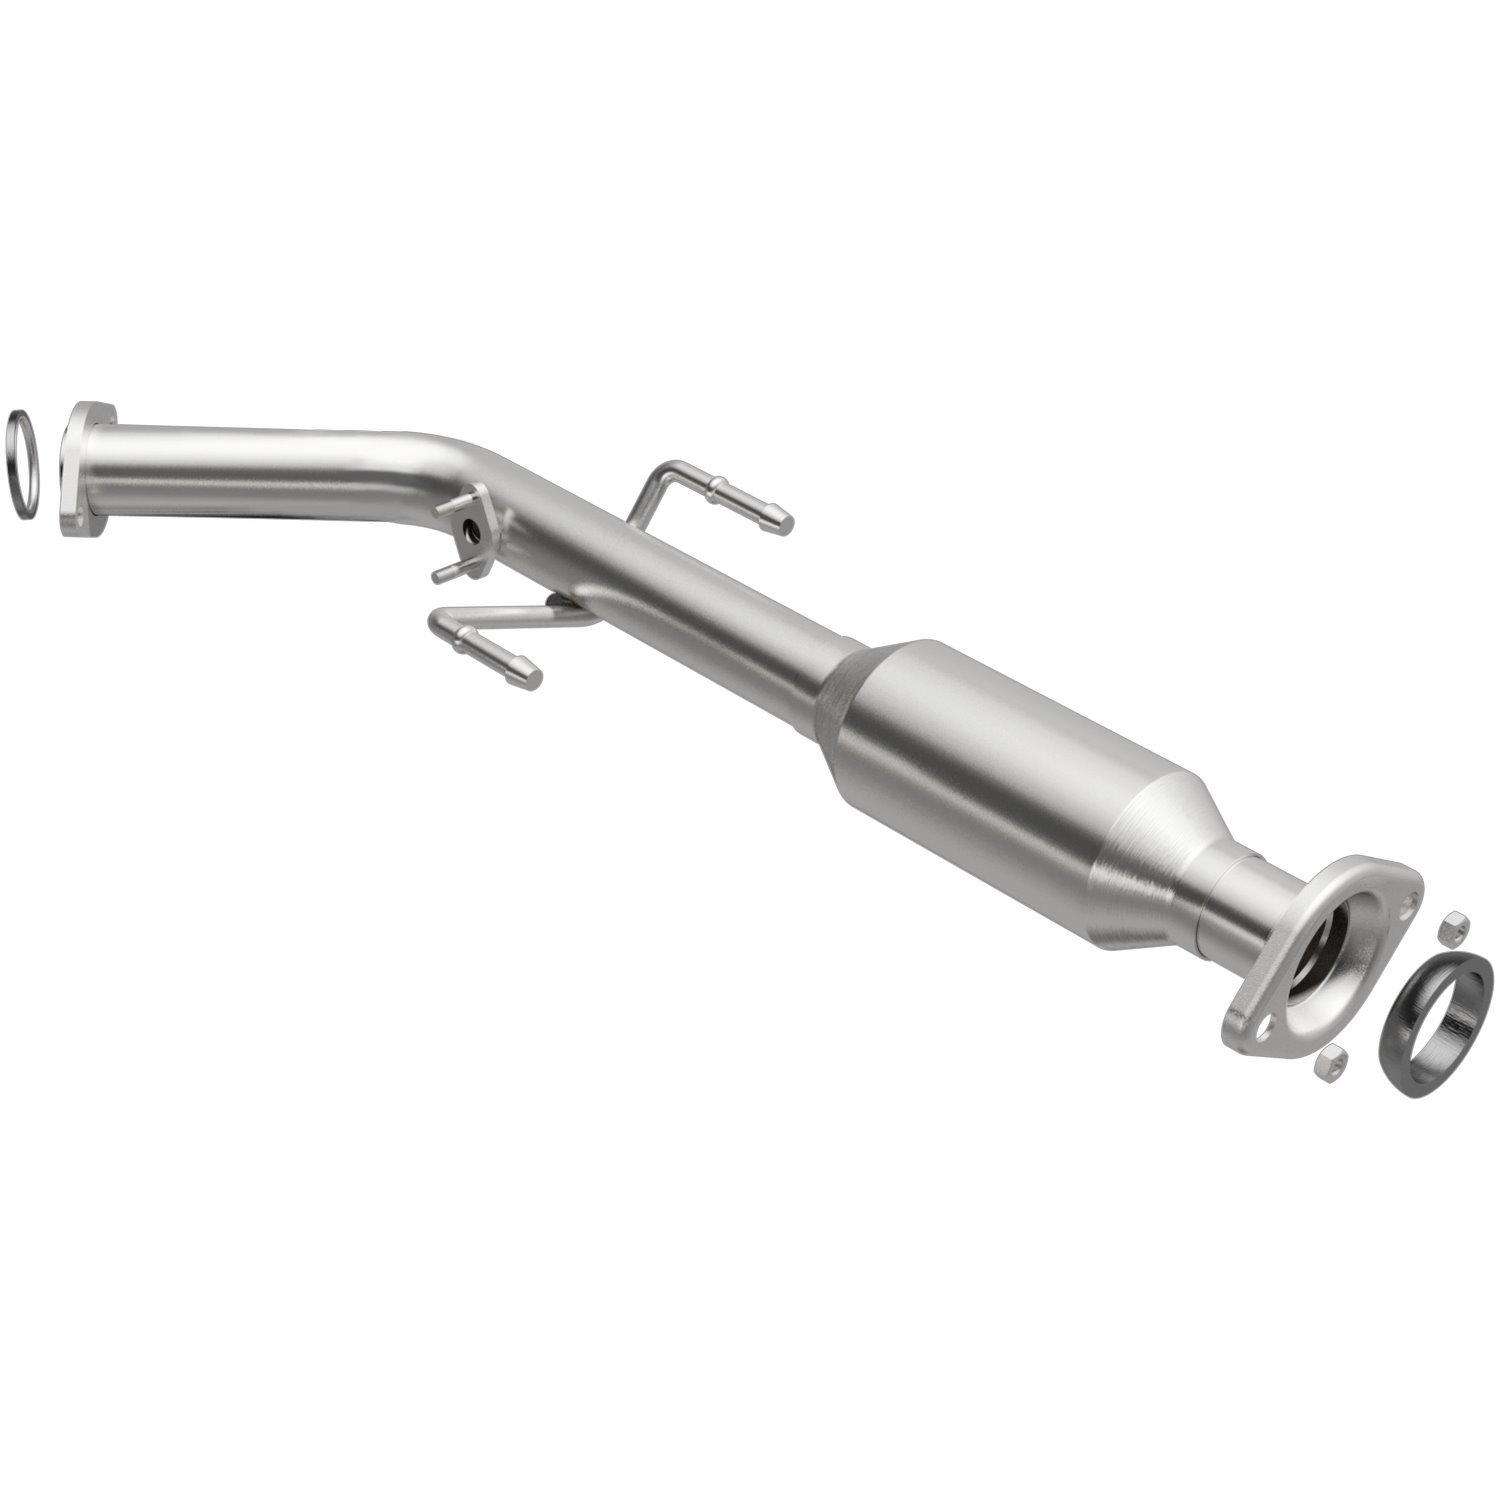 2001-2003 Toyota Sienna HM Grade Federal / EPA Compliant Direct-Fit Catalytic Converter